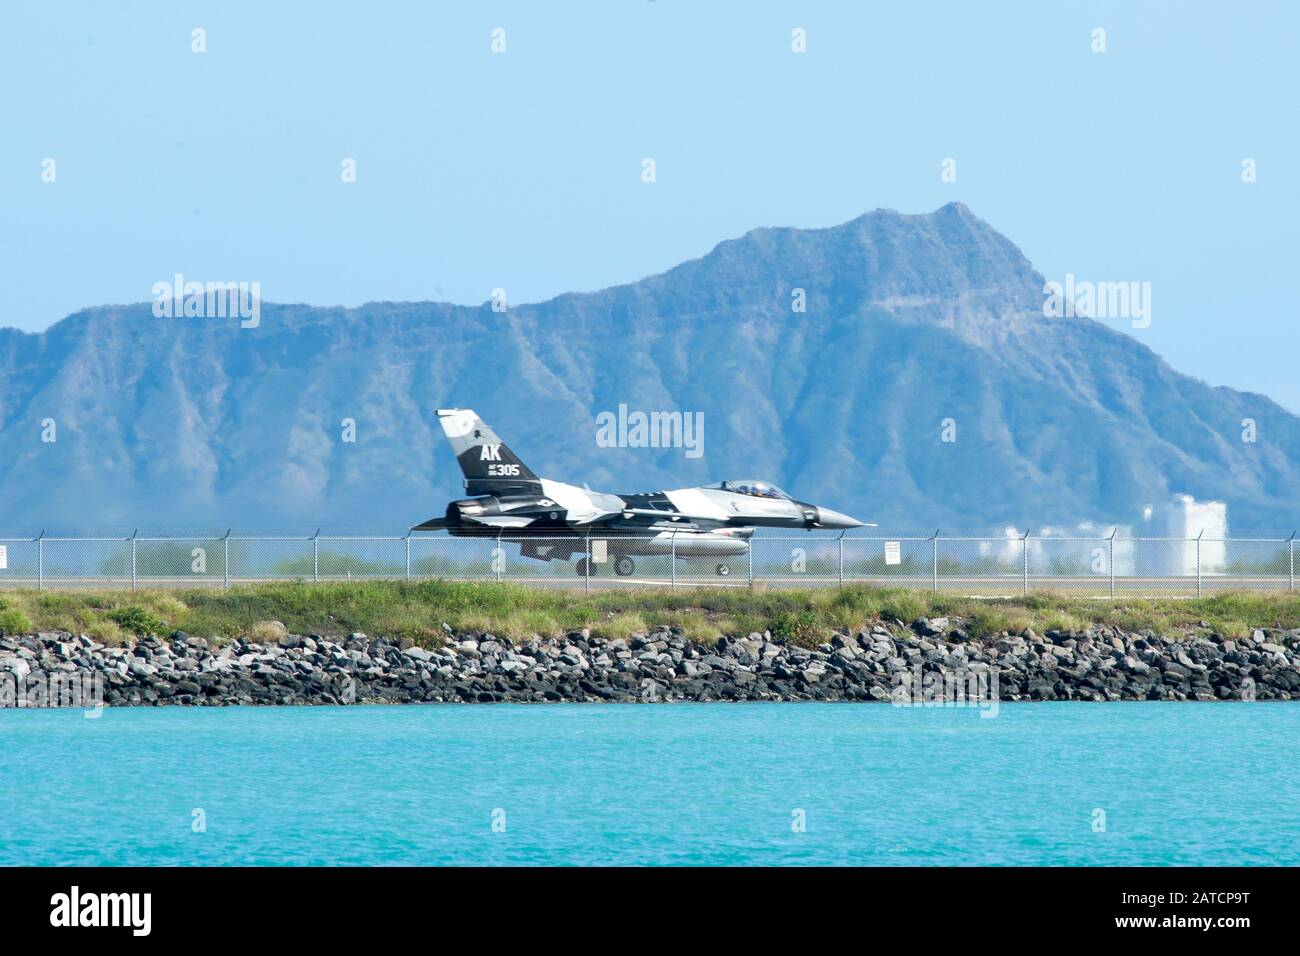 An F-16 Fighting Falcon from the 18th Aggressor Squadron taxis down the Honolulu Airport Runway Jan. 29, 2019. The aircraft practiced combat tactics alongside the world’s most advanced fifth-generation airframes, the F-22 Raptor and F-35A Lightning II. The F-16 is assigned to the 18th Aggressor Squadron in Eielson Air Force Base, Alaska, and its mission is to prepare pilots for victory by simulating combat tactics which are likely to be faced in the event of an air-to-air battle.  (U.S. Air Force photo by Senior Airman John Linzmeier) Stock Photo